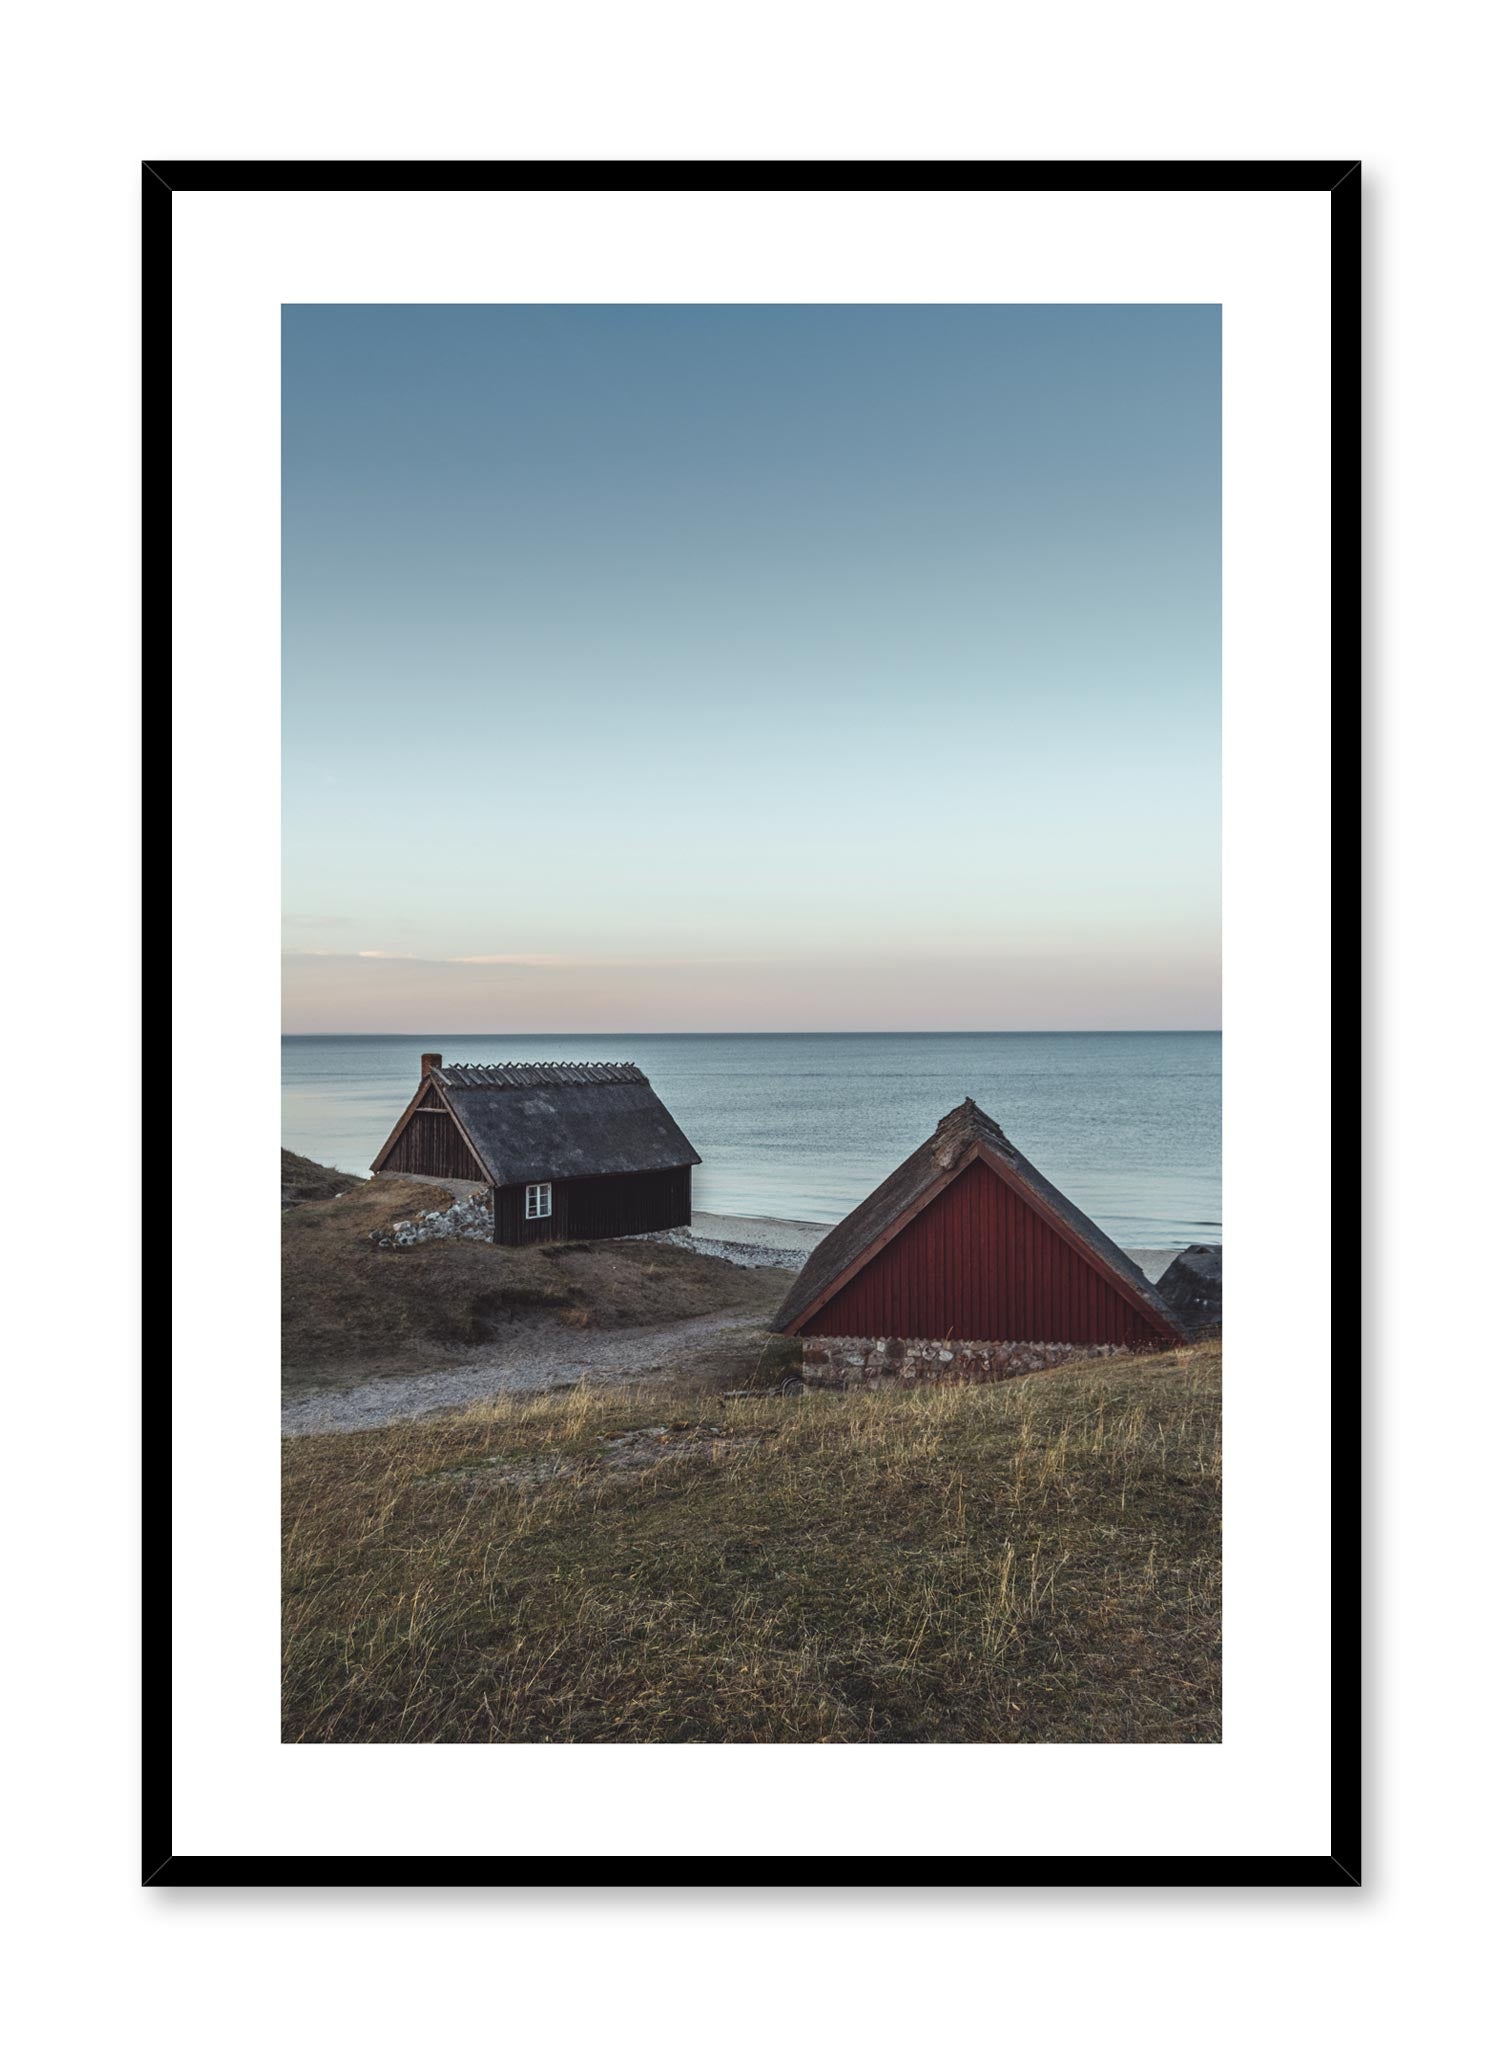 Minimalist design poster by Opposite Wall with seaside town photography